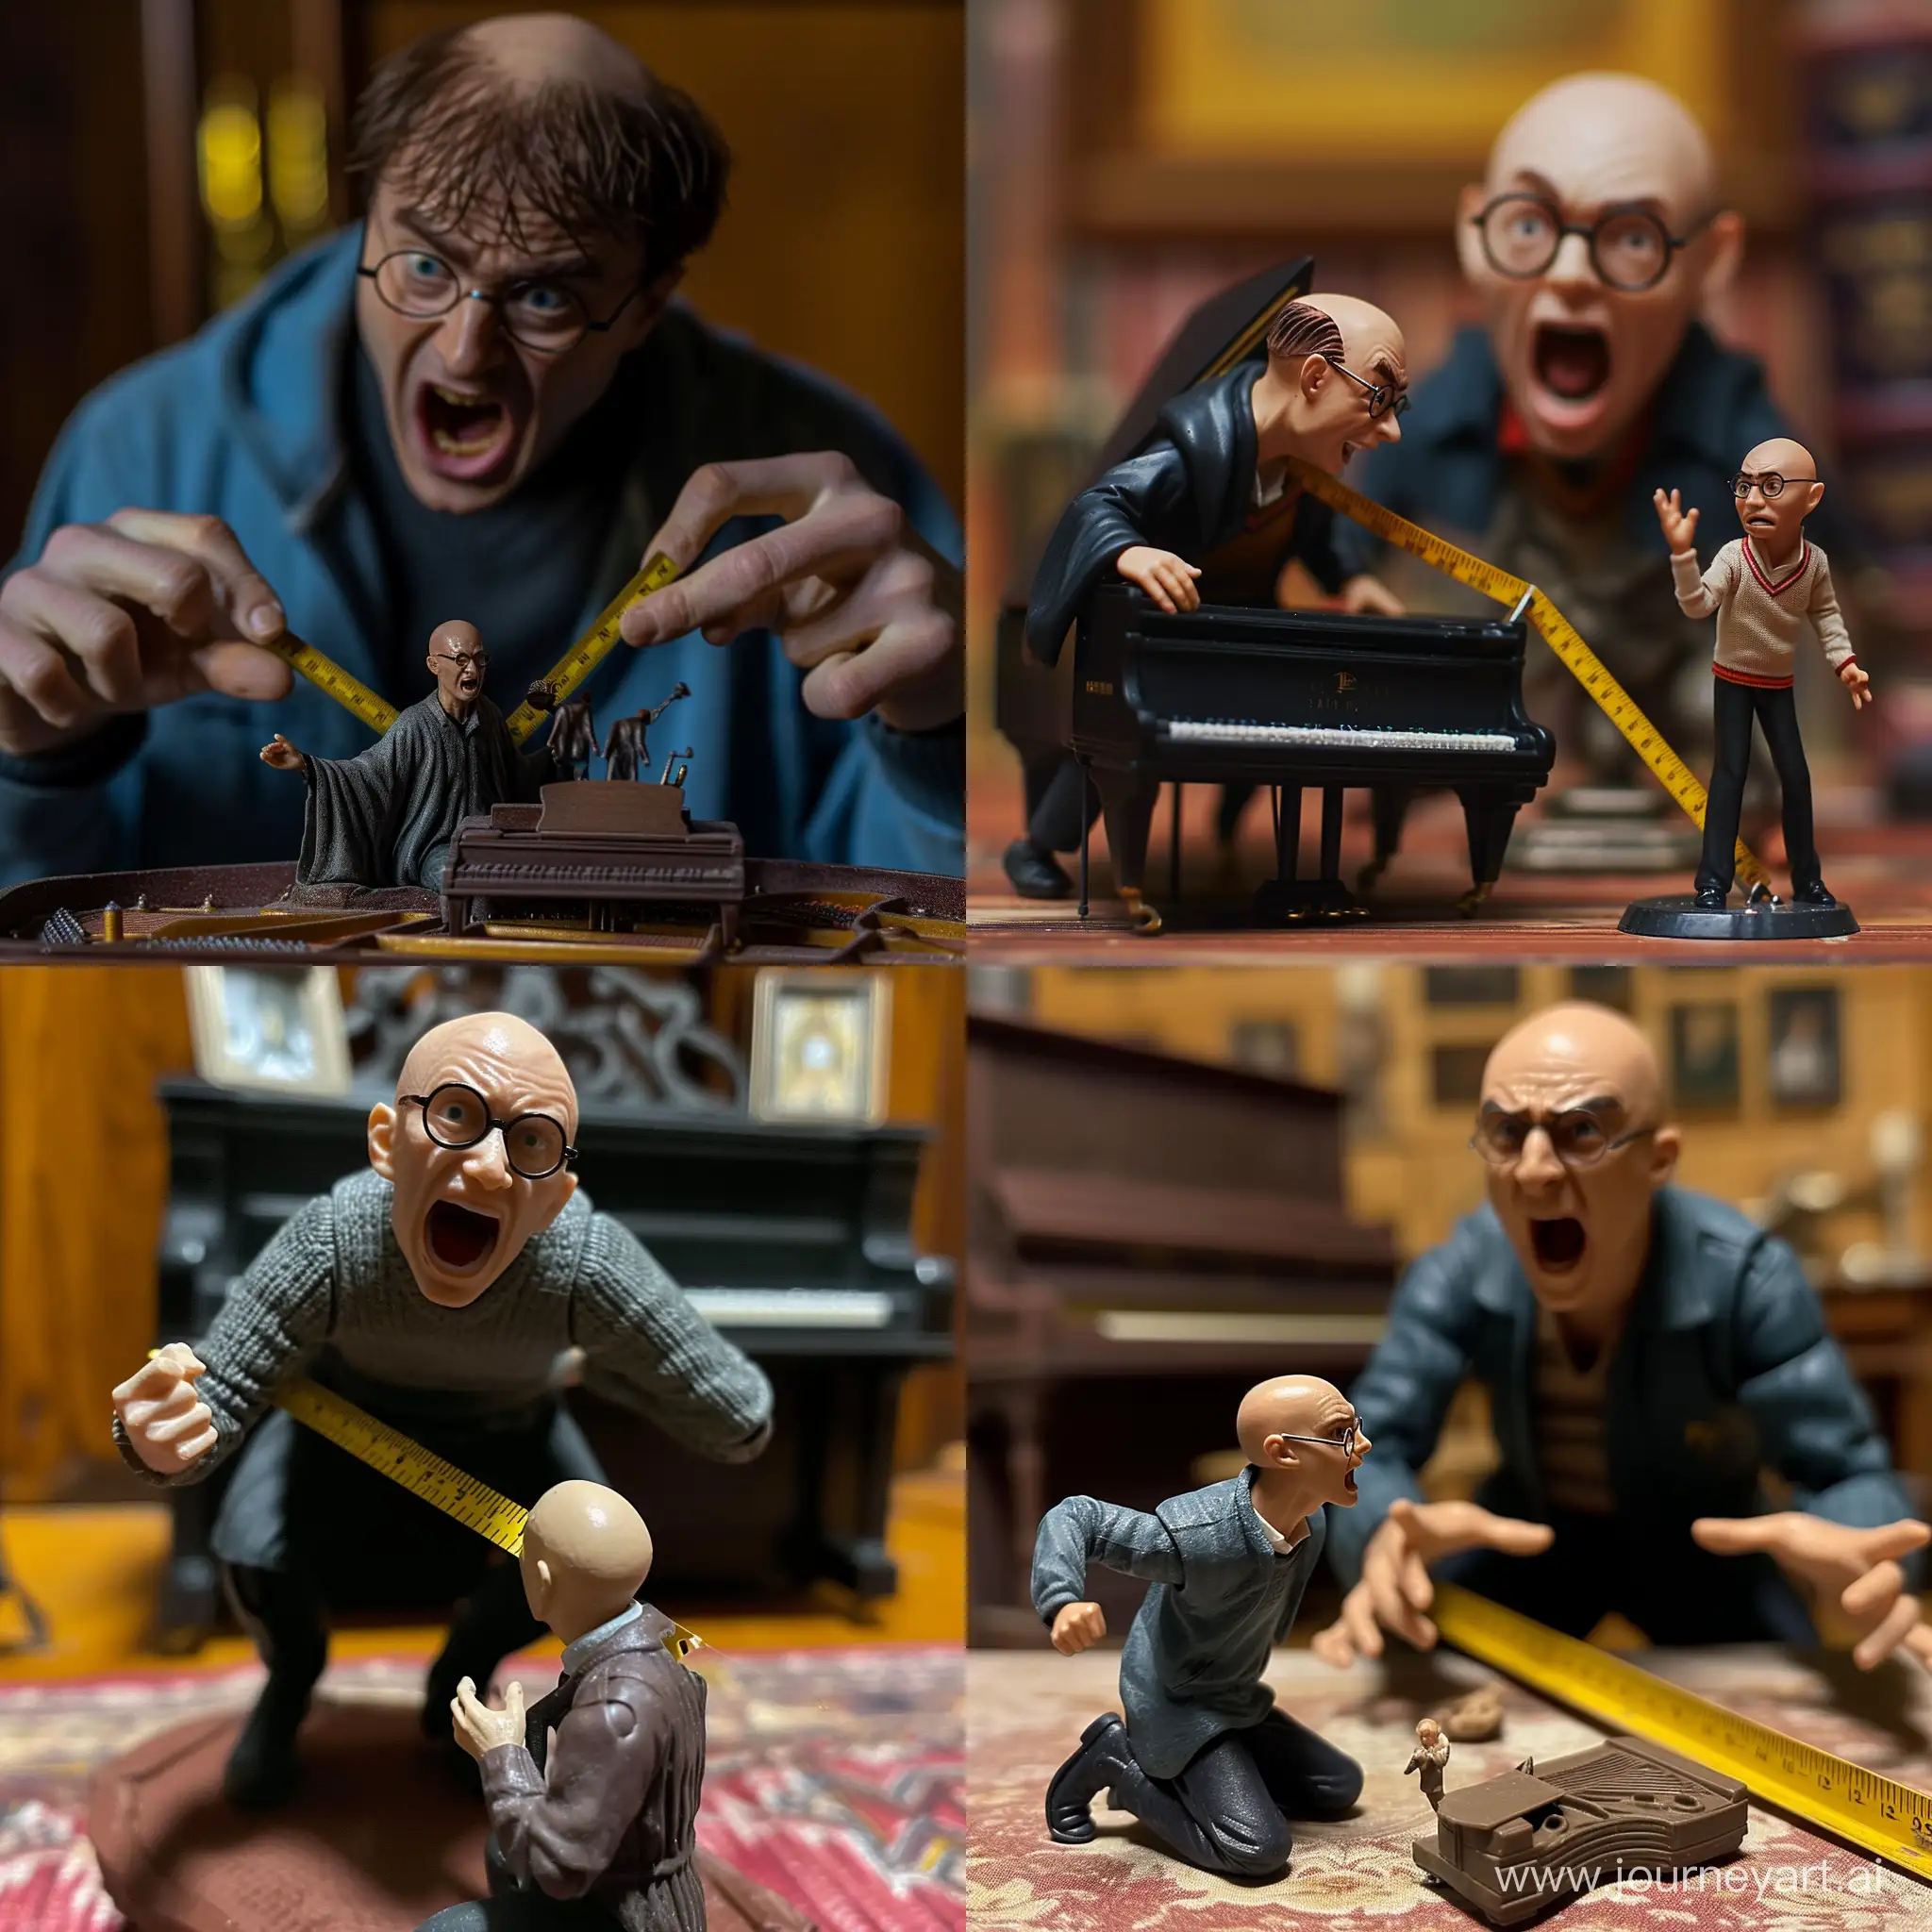 Harry Poter witha frantuc agitated face. He is measuring a figurine of a bald male piano teacher.